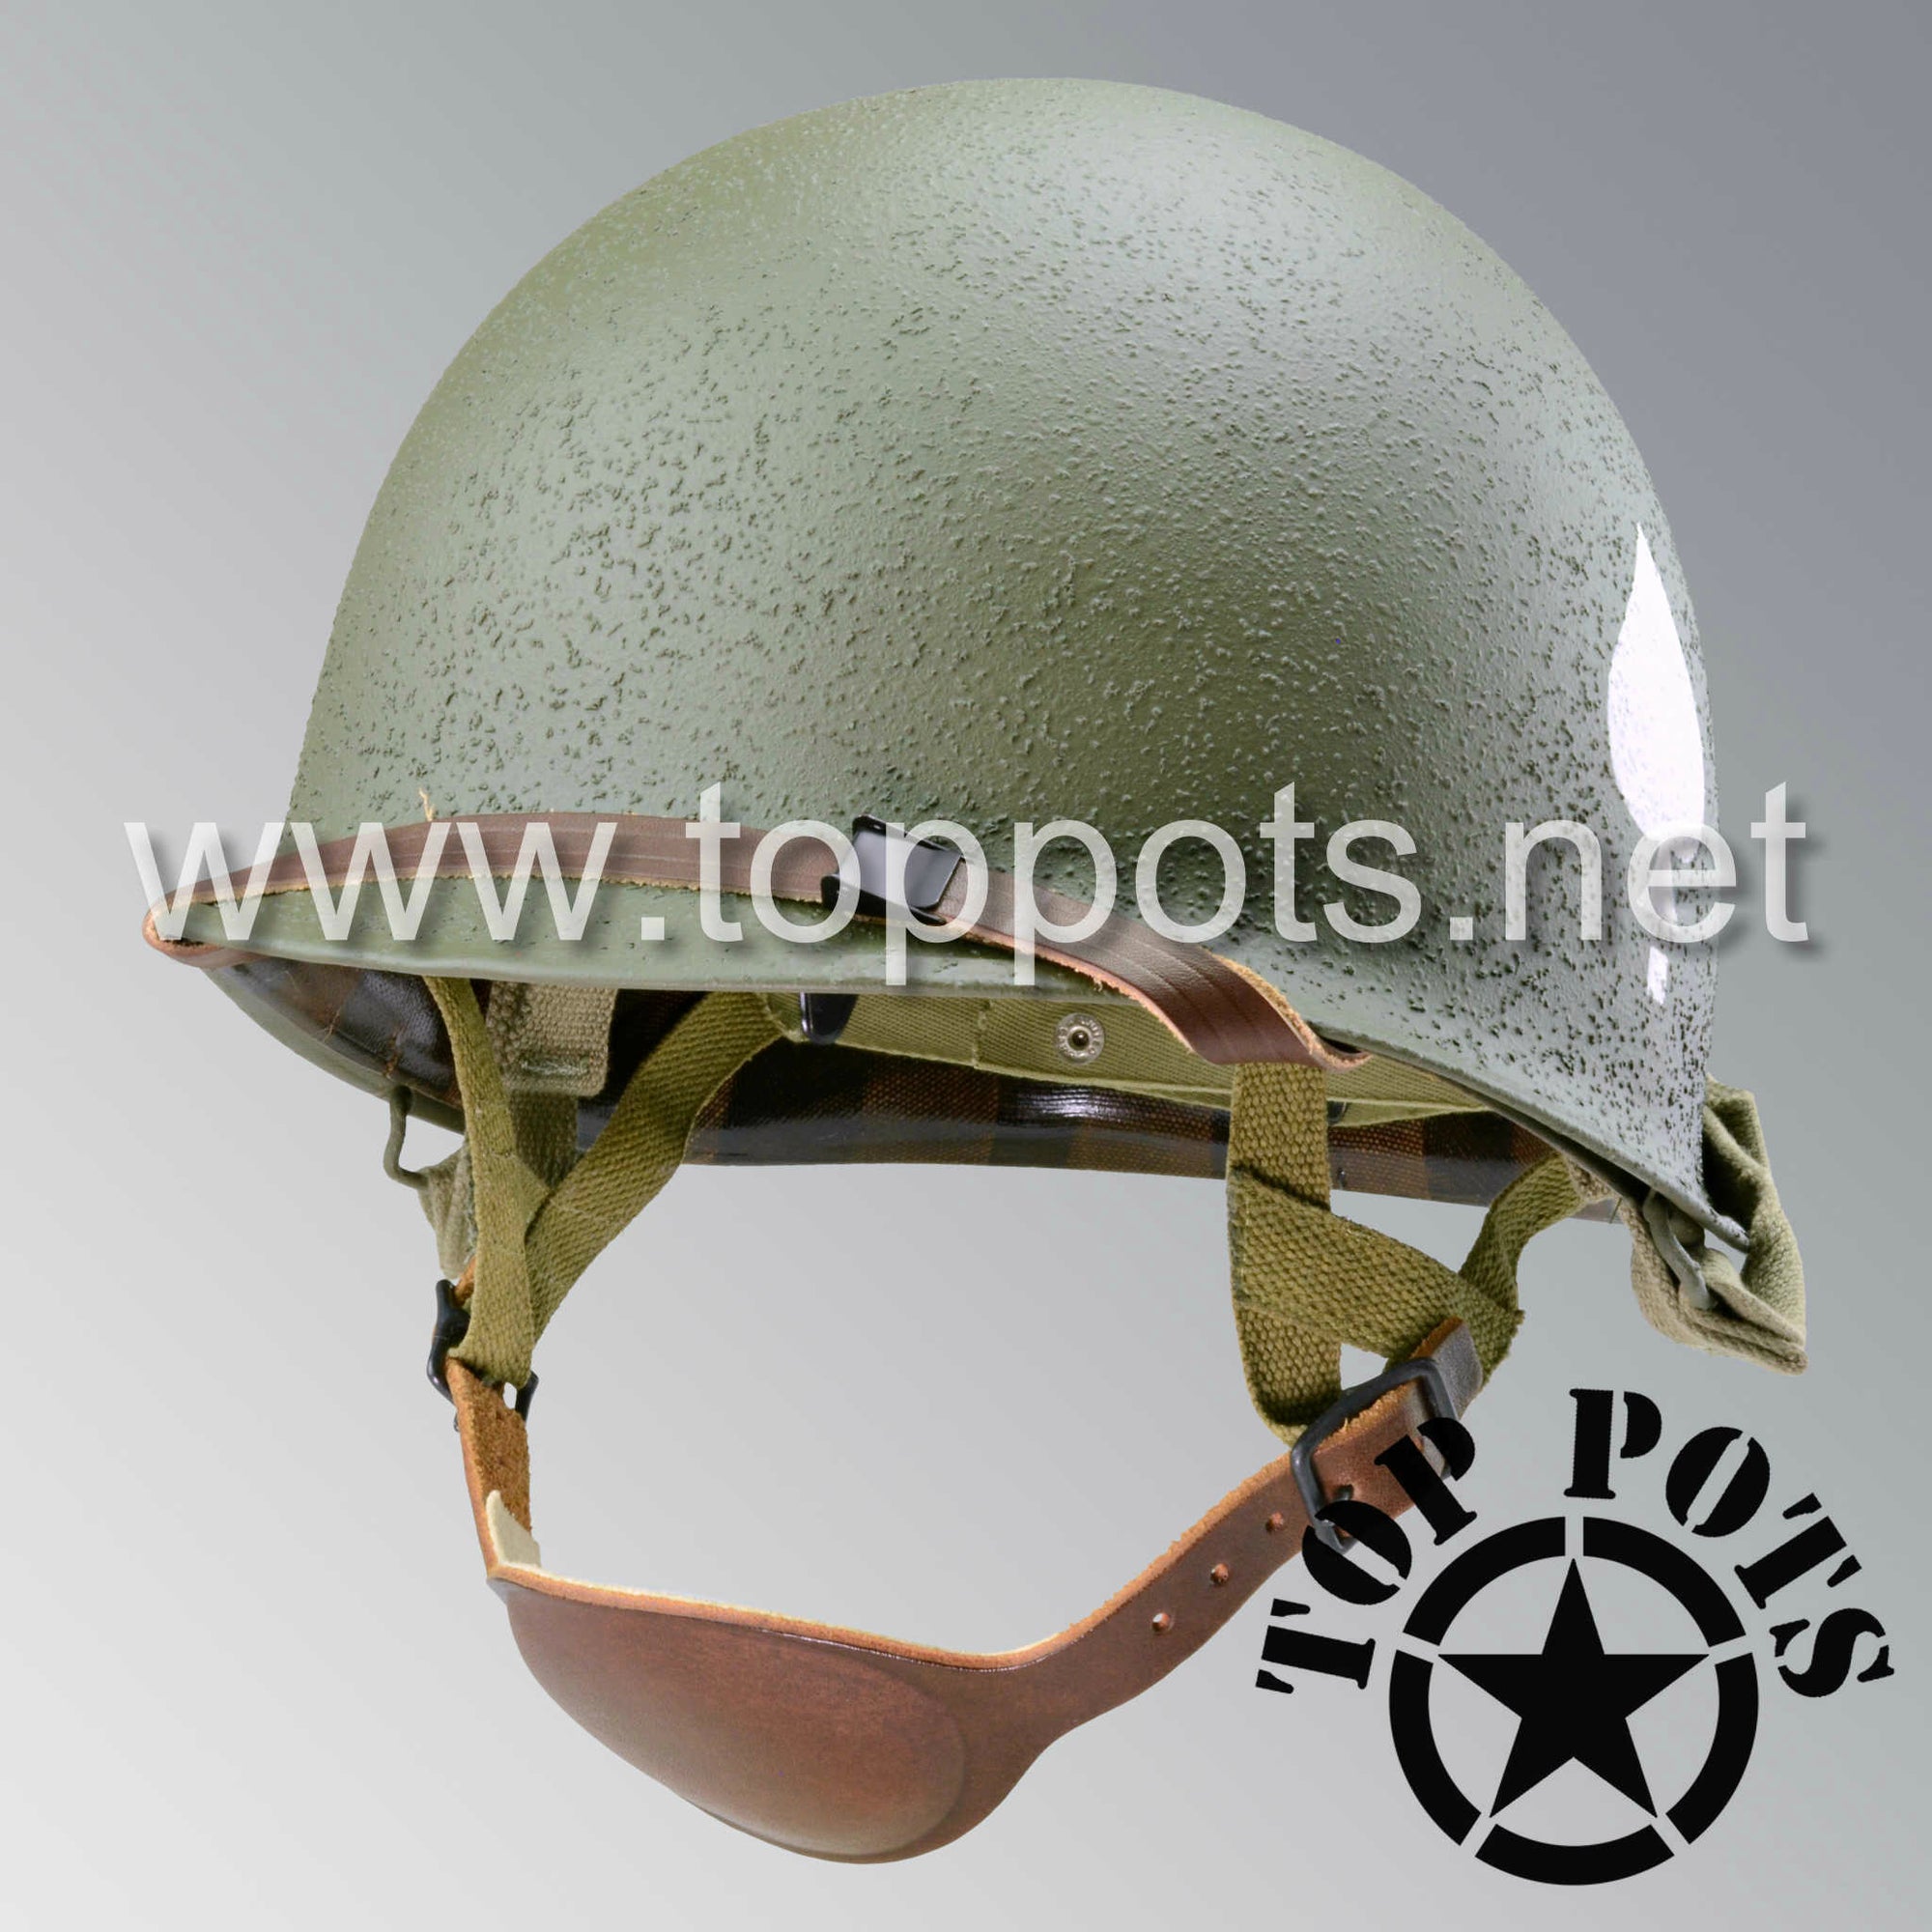 WWII US Army Restored M1C Paratrooper Airborne Helmet Swivel Bale Shell and Liner with 506th 2nd Battalion PIR Emblem - Post War Shell